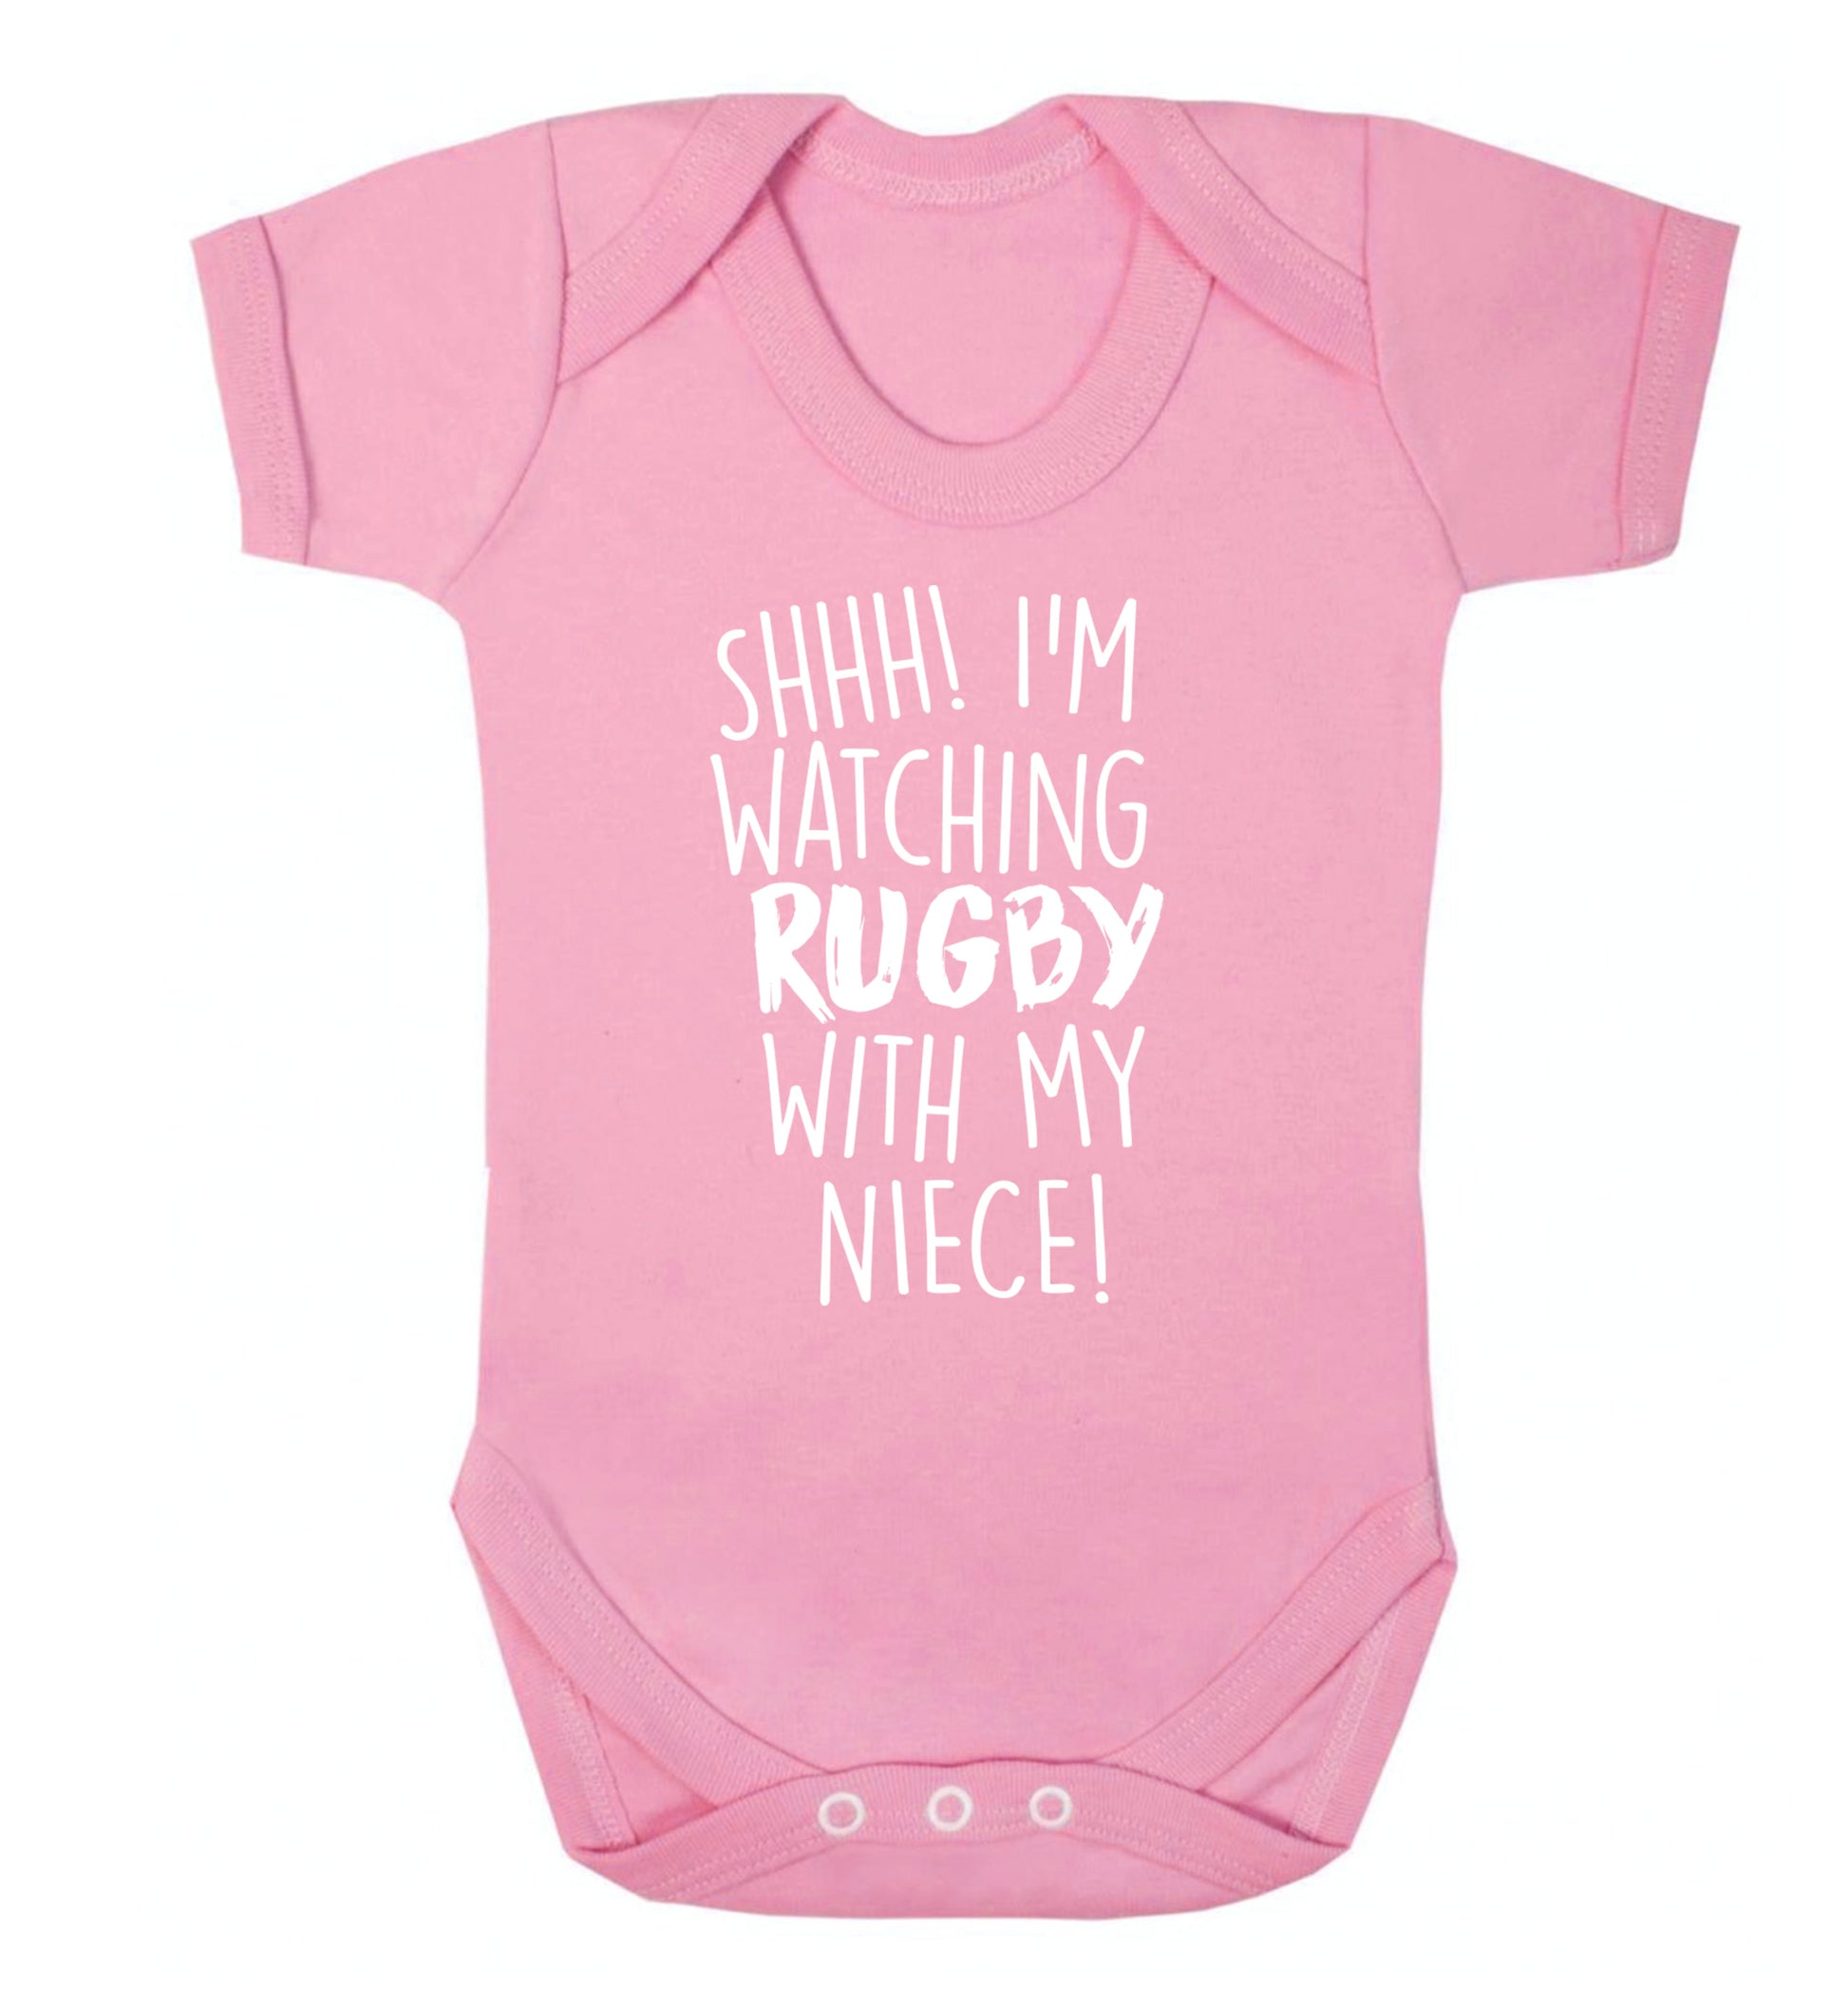 Shh.. I'm watching rugby with my niece Baby Vest pale pink 18-24 months